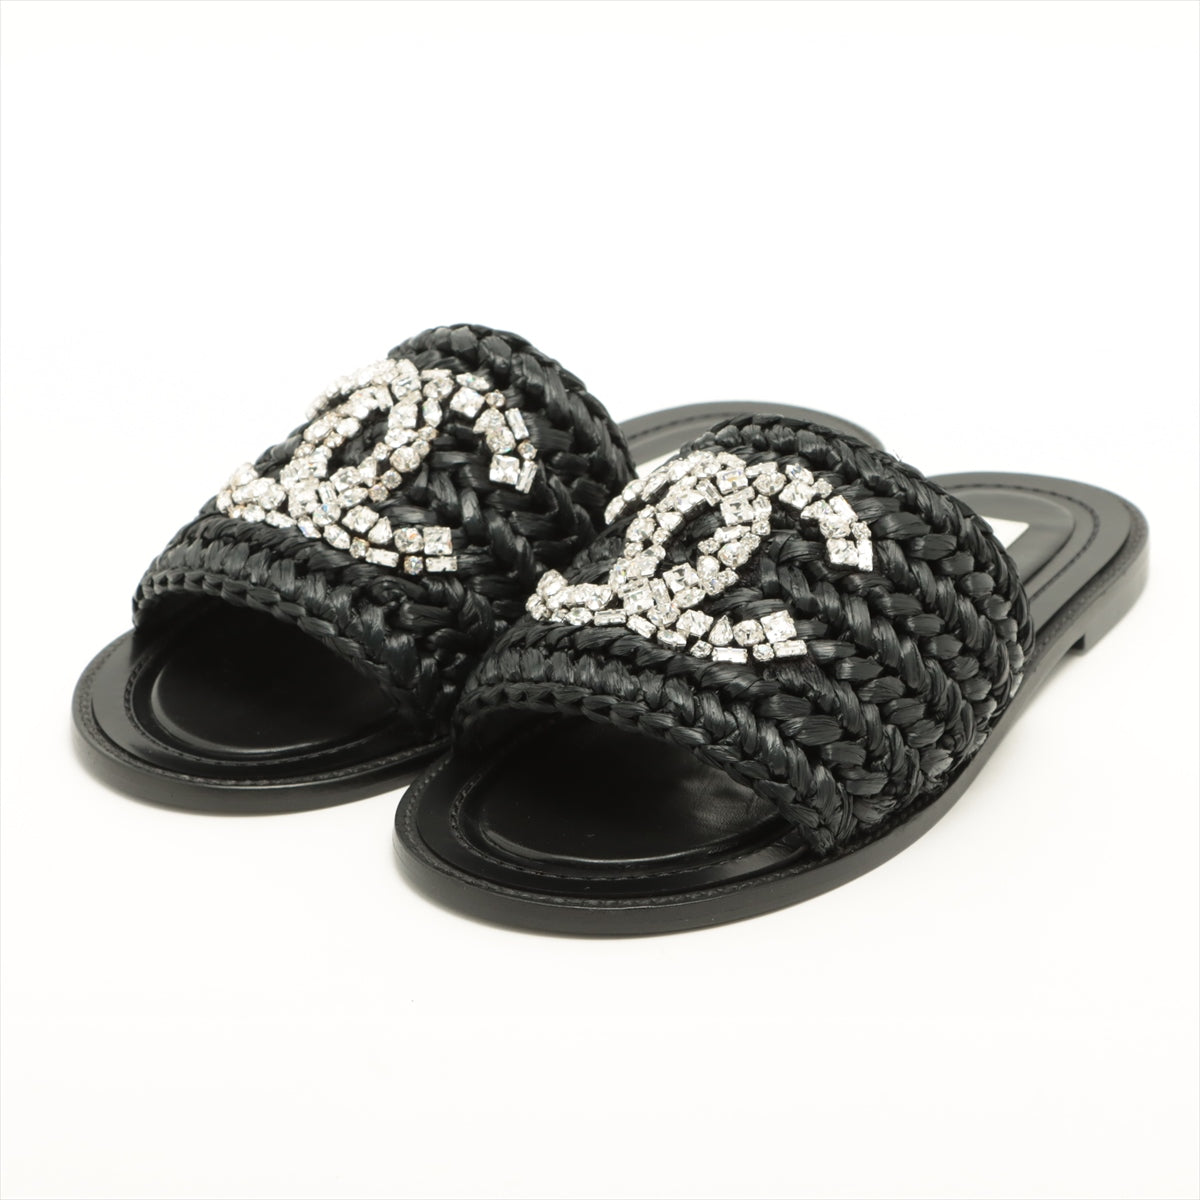 Chanel Coco Mark 23SS Straw & leather Sandals 38C Ladies' Black G40083 Comes with bijou There is a bag